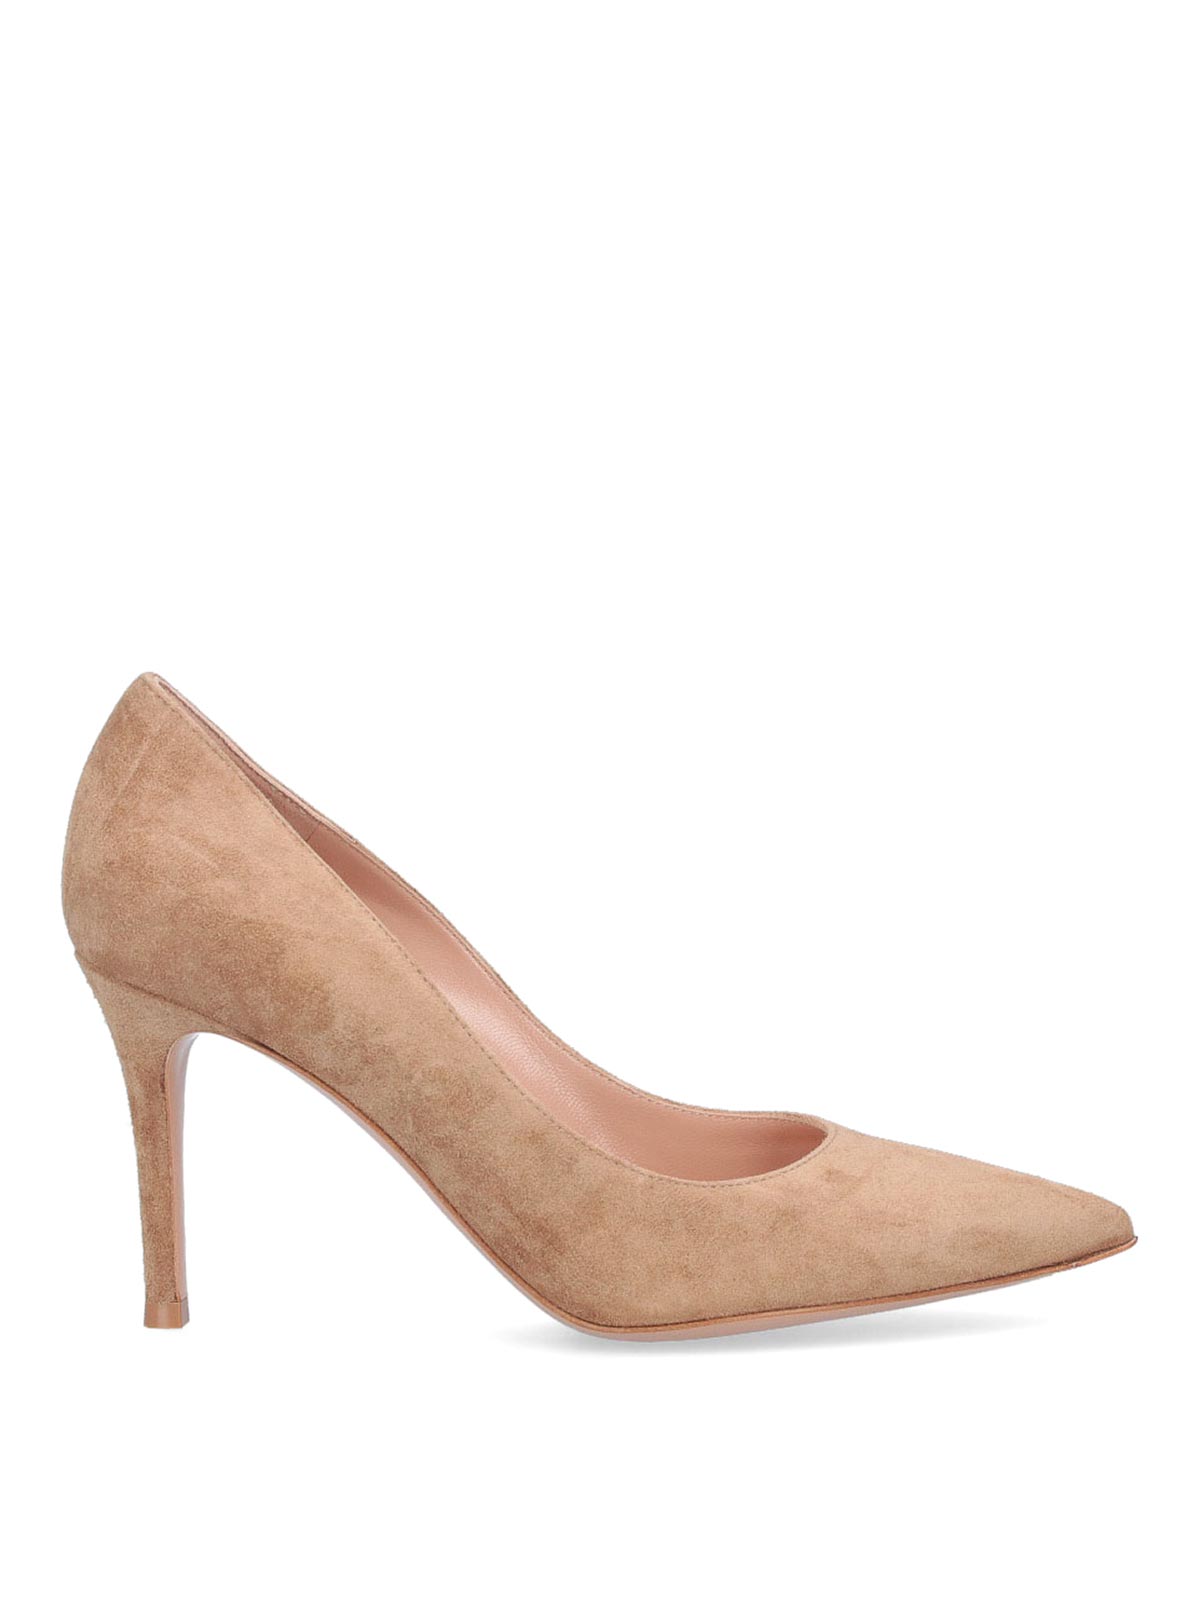 Gianvito Rossi Pumps In Beis